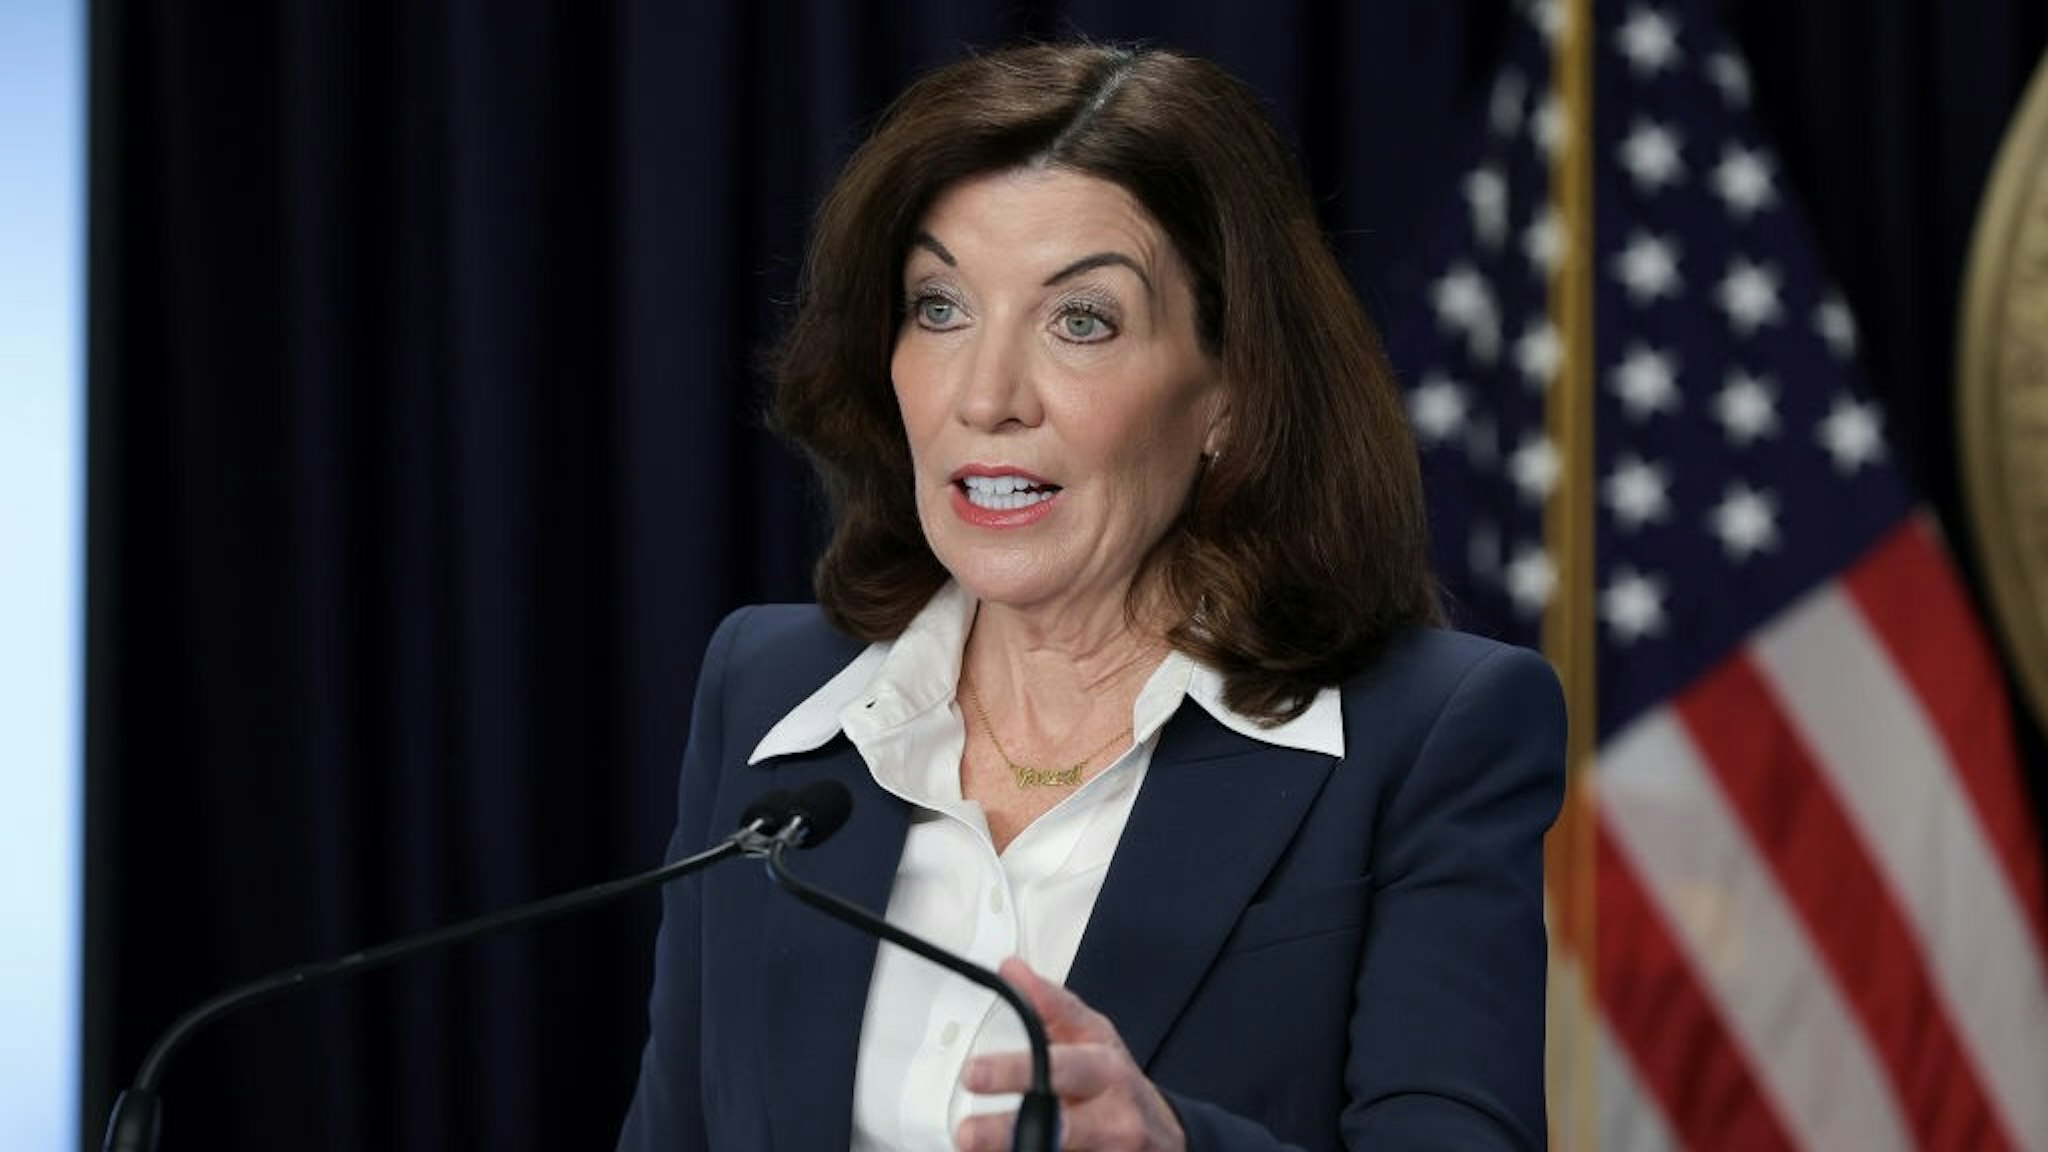 New York Governor Kathy Hochul Holds Covid-19 Update NEW YORK, NEW YORK - FEBRUARY 09: New York Governor Kathy Hochul speaks during a Covid-19 press conference on February 09, 2022 in New York City. Governor Hochul announced the end of the New York state indoor mask mandate, effective tomorrow February 10th. Masks will still be require at schools, nursing homes, hospitals, bus and train stations. The mask mandate for schools will be evaluated upon return from winter break. (Photo by Dia Dipasupil/Getty Images) Dia Dipasupil / Staff via Getty Images